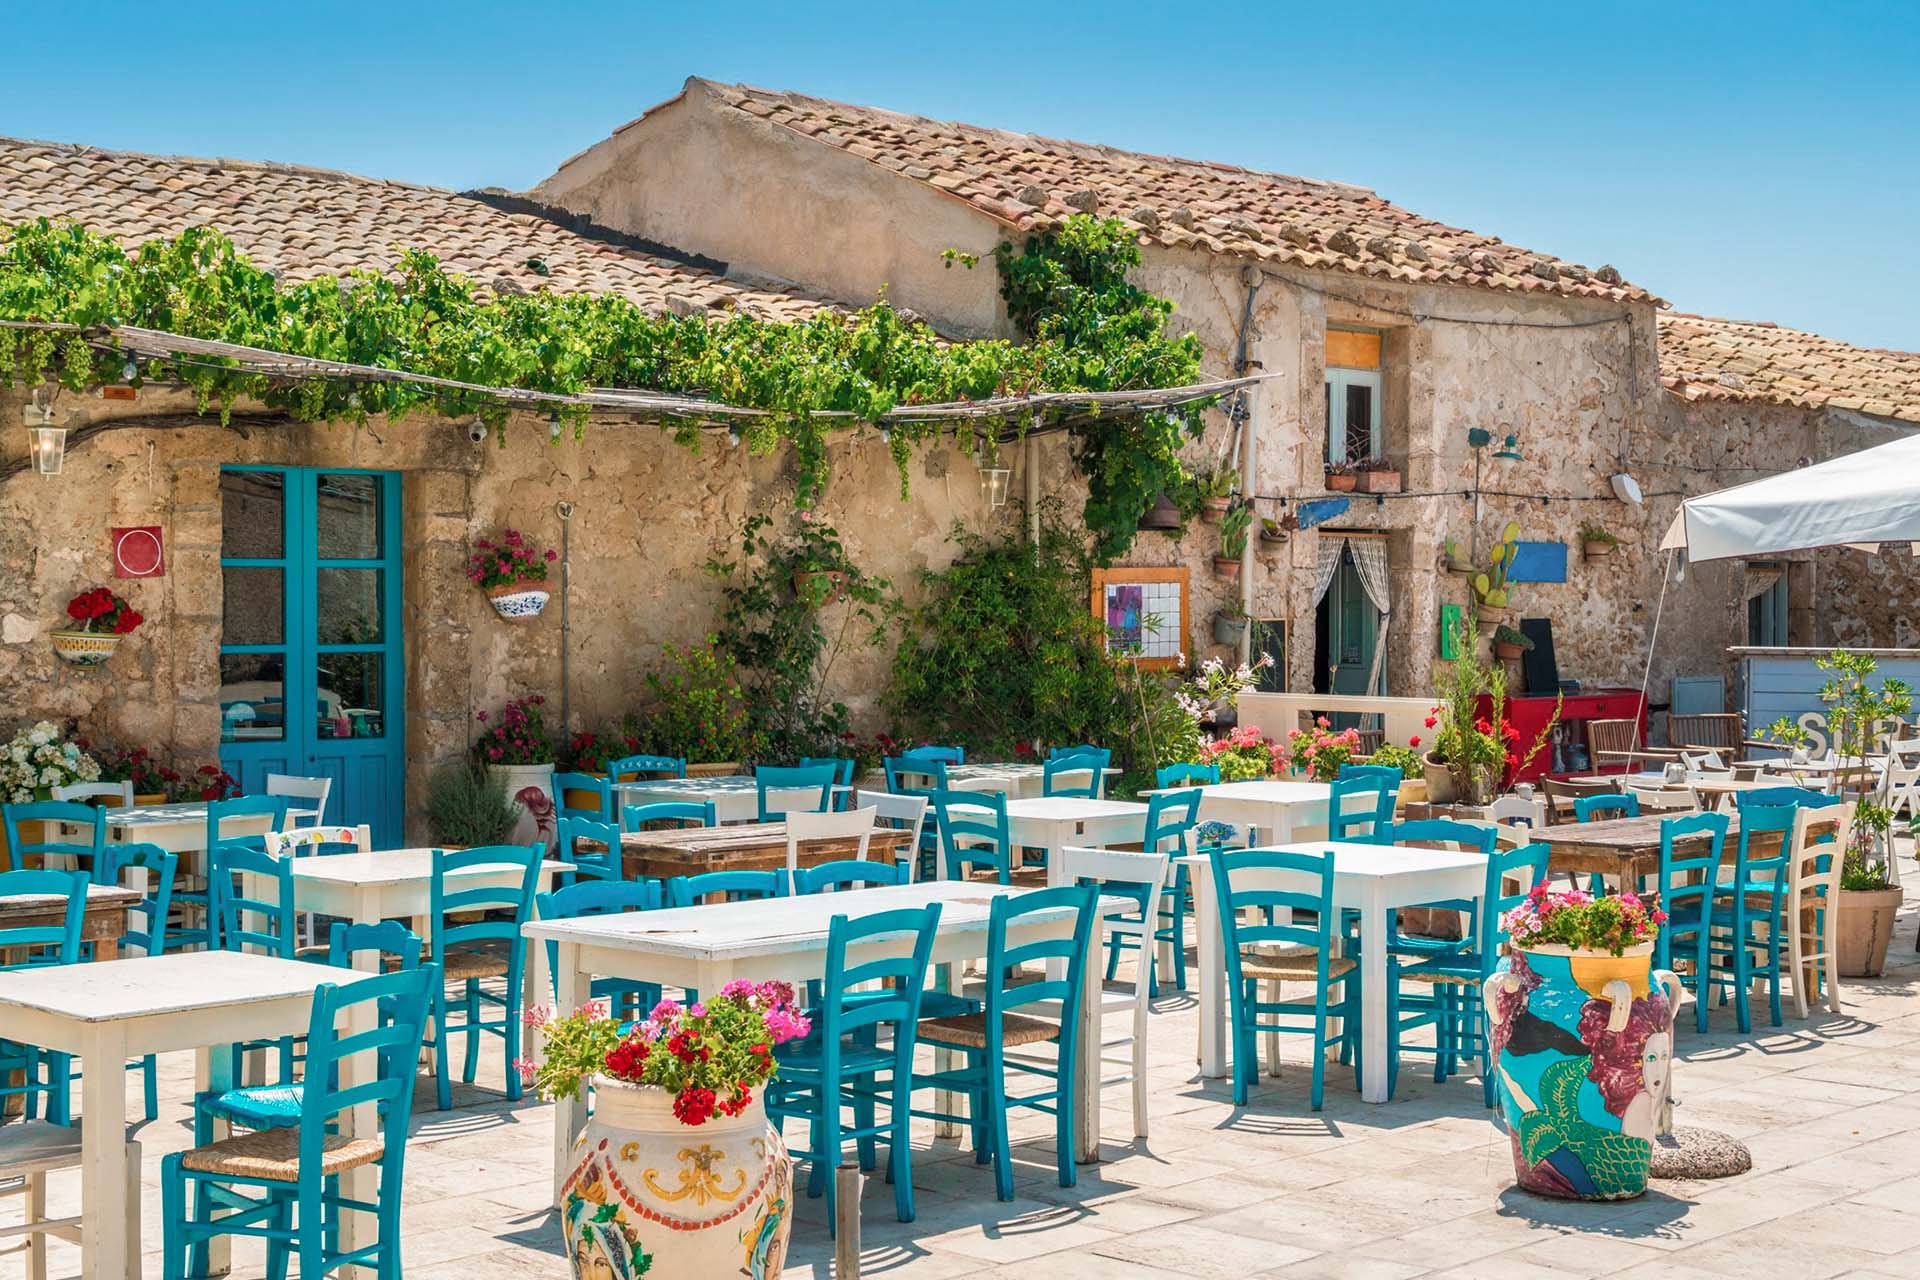 Marzamemi square with the characteristic tables with blue chairs